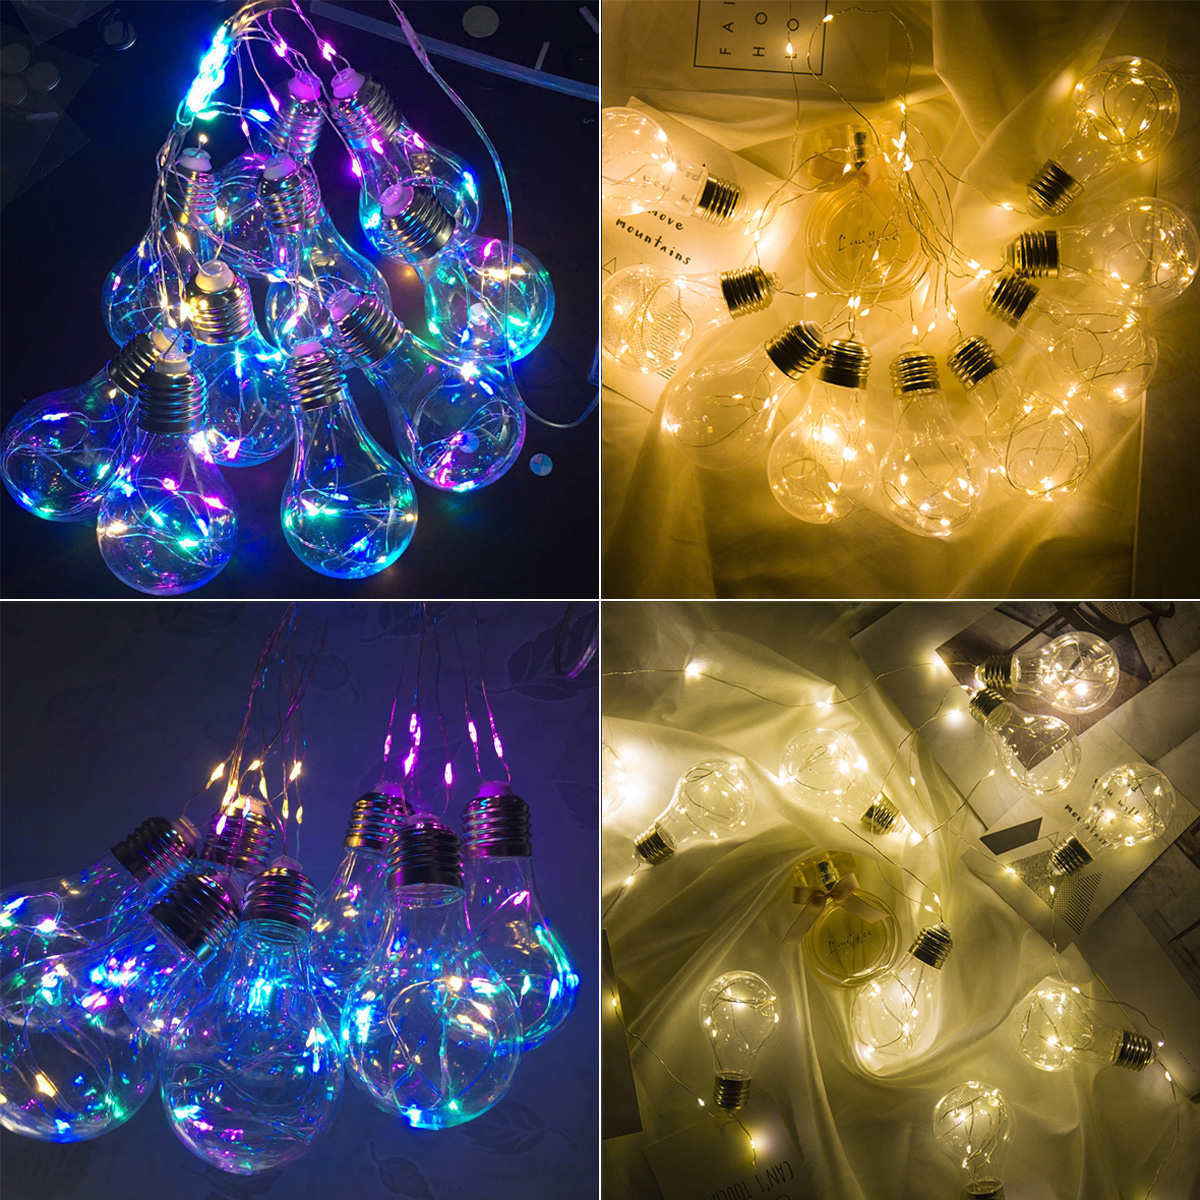 10-Bulbs-Light-Hanging-LED-String-Light-Firefly-Party-Wedding-Home-Decoration-Romantic-1339196-5